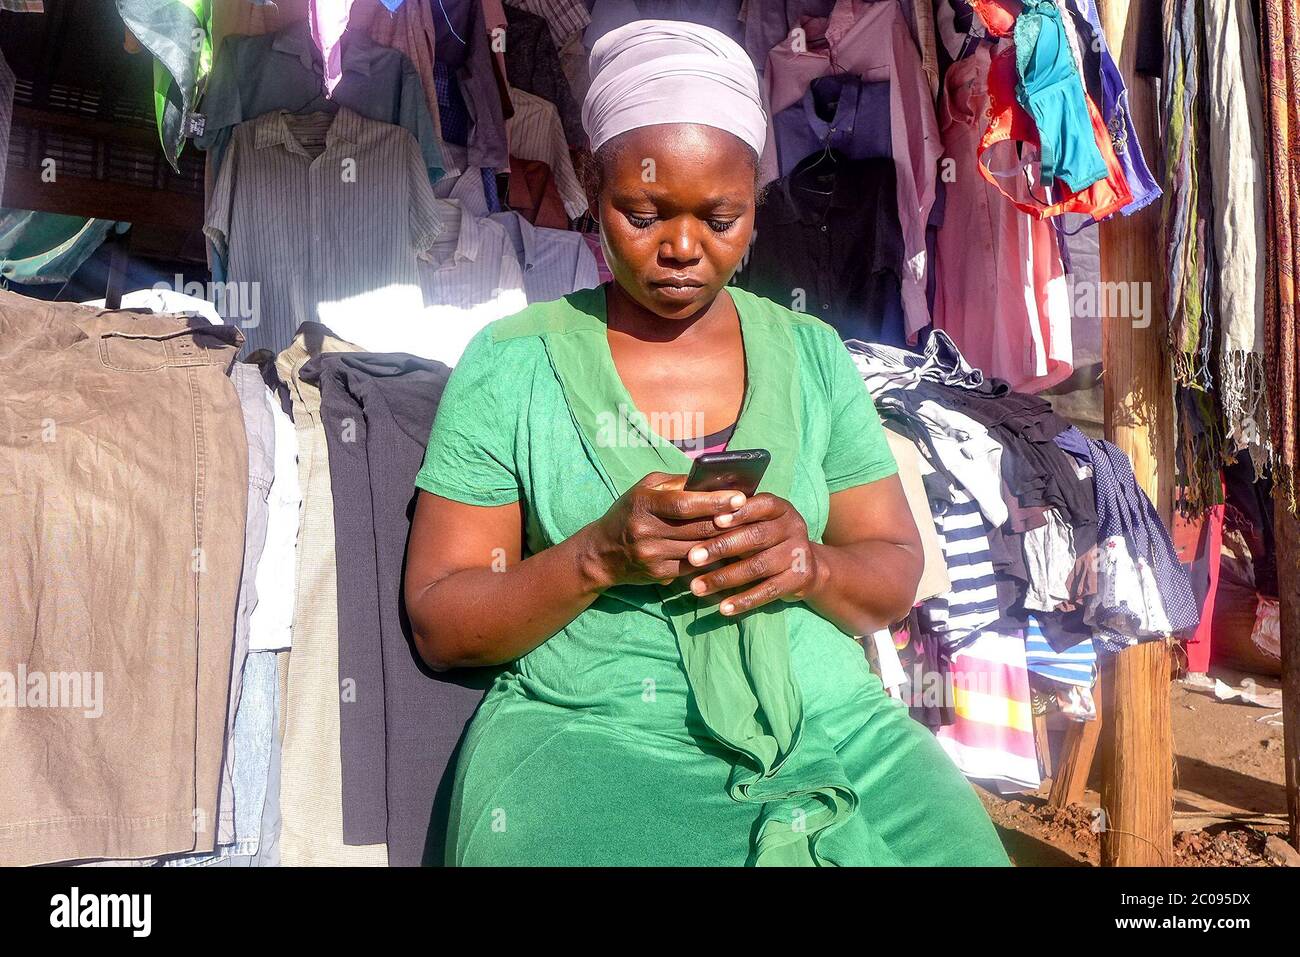 Alice Gochayi has published 10 books on Facebook and WhatsApp. She used a painful experience from her life as inspiration for her writing. She continues to write as she works at a flea market in Harare, Zimbabwe. (Sharon Munjenjema, GPJ Zimbabwe) Stock Photo